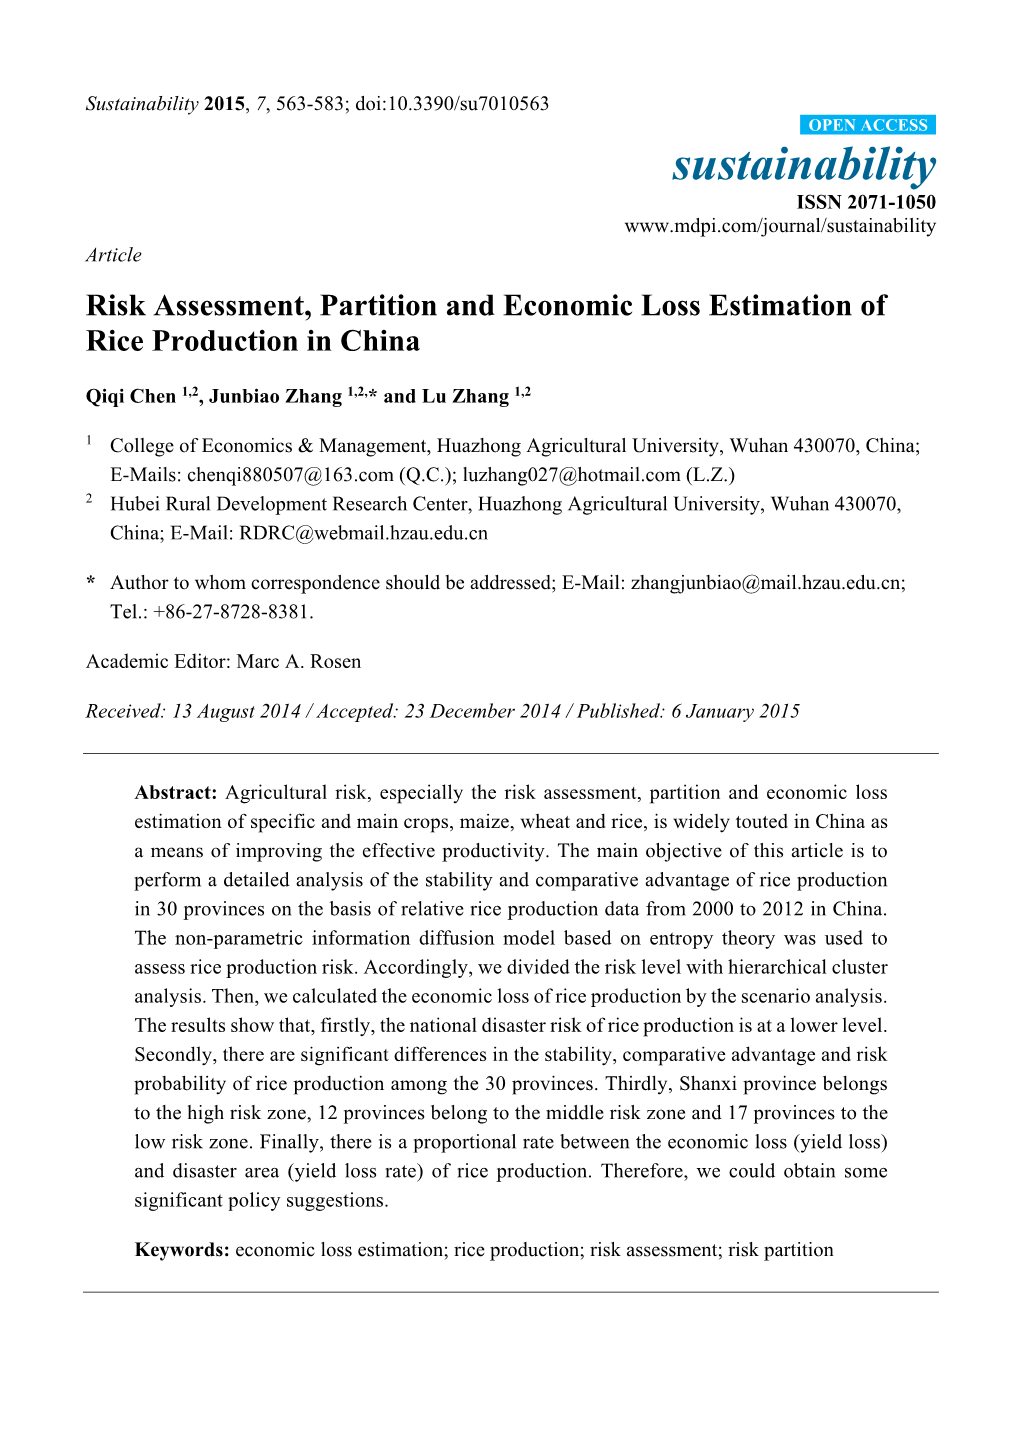 Risk Assessment, Partition and Economic Loss Estimation of Rice Production in China